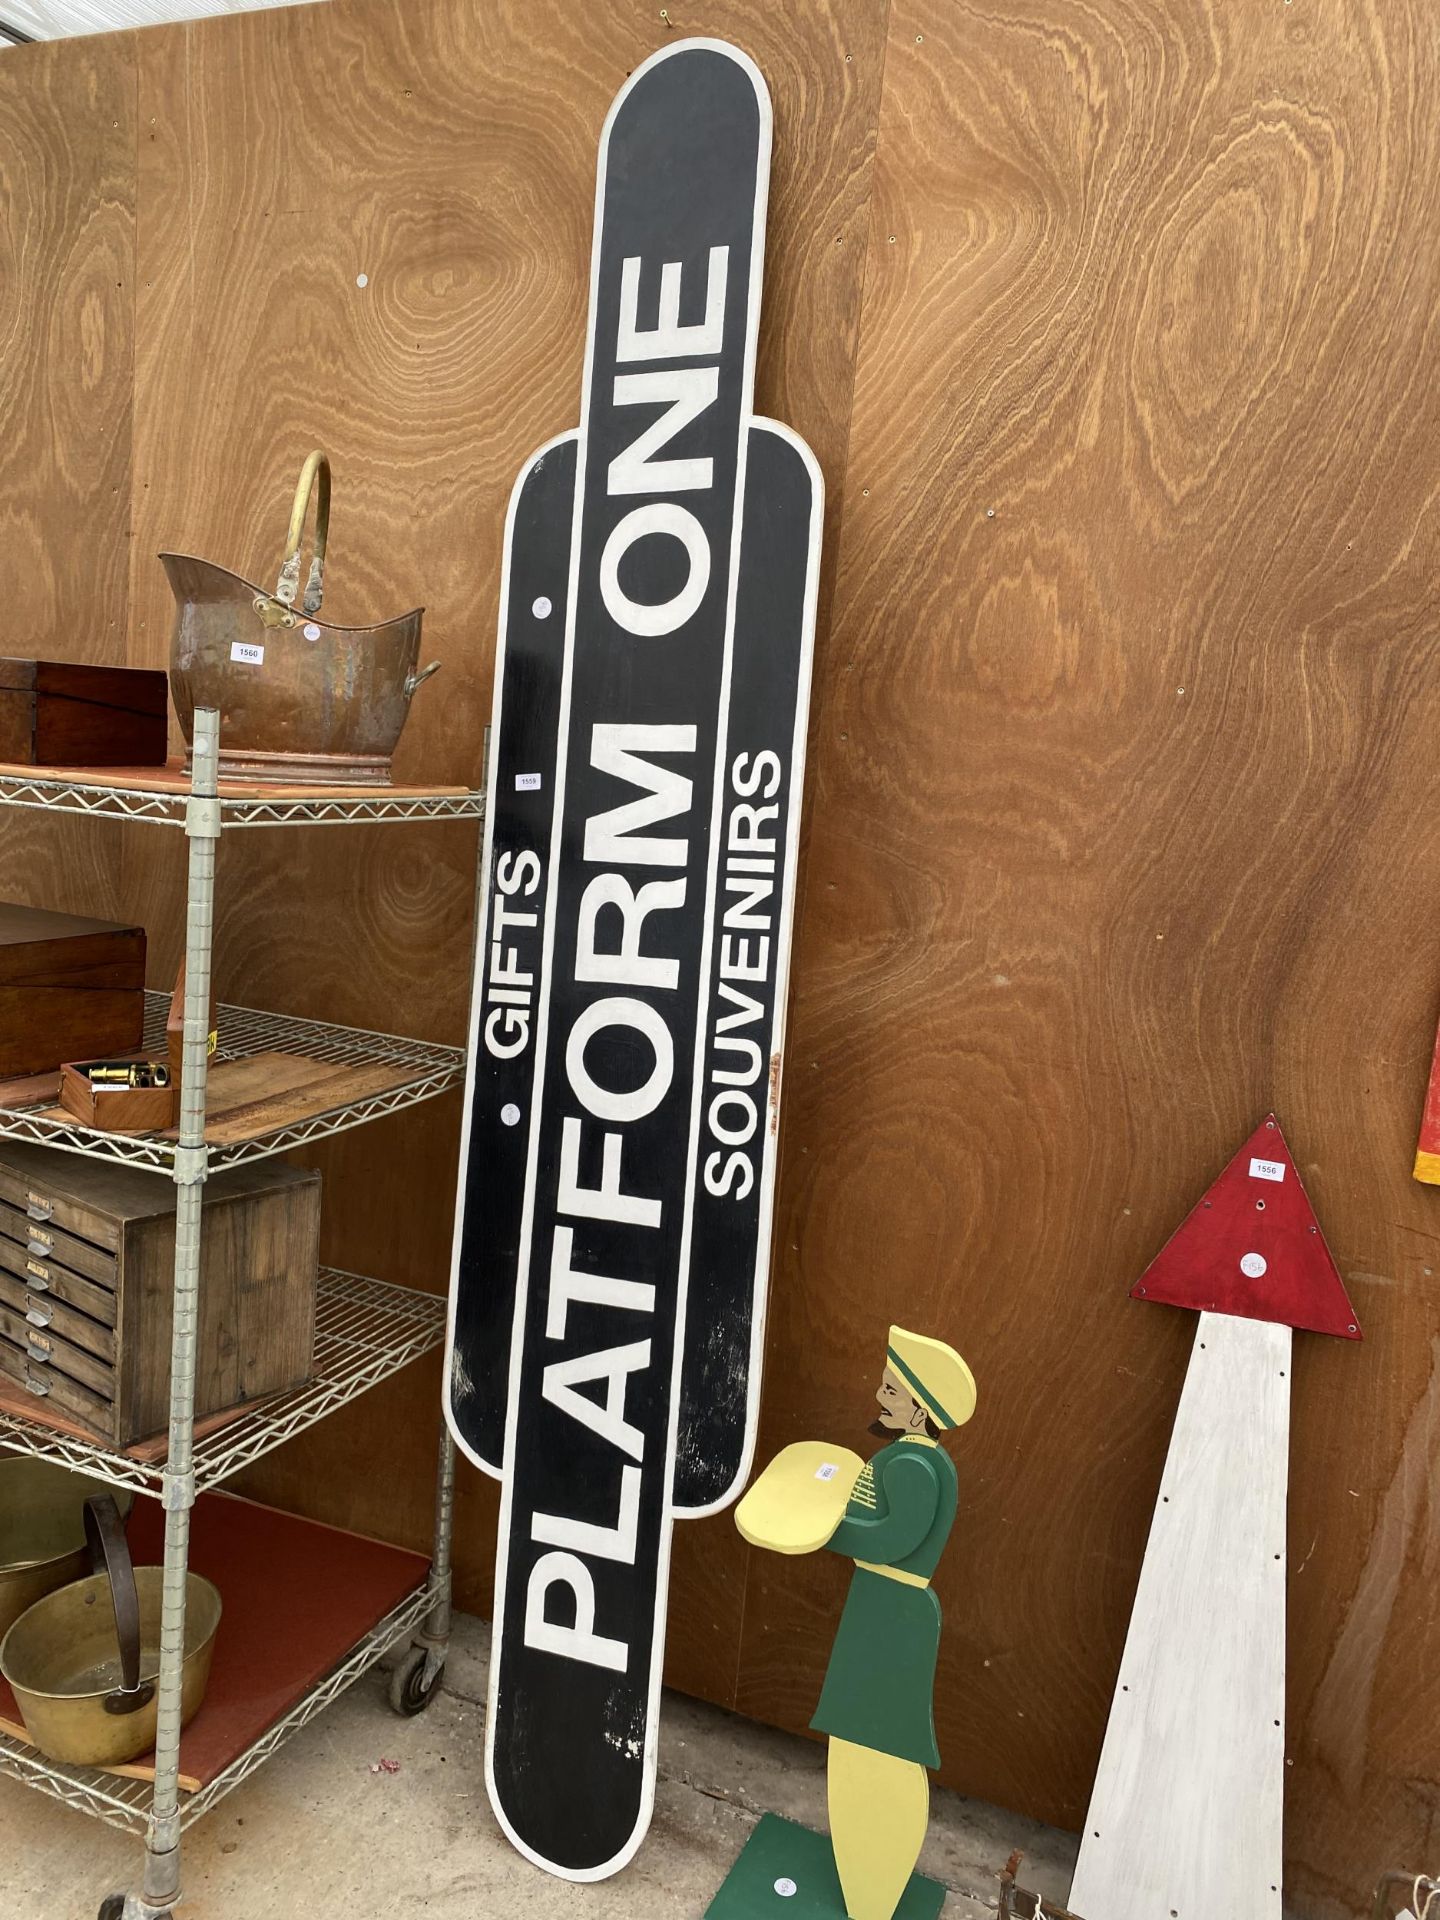 A WOODEN HAND PAINTED 'PLATFORM ONE' SIGN